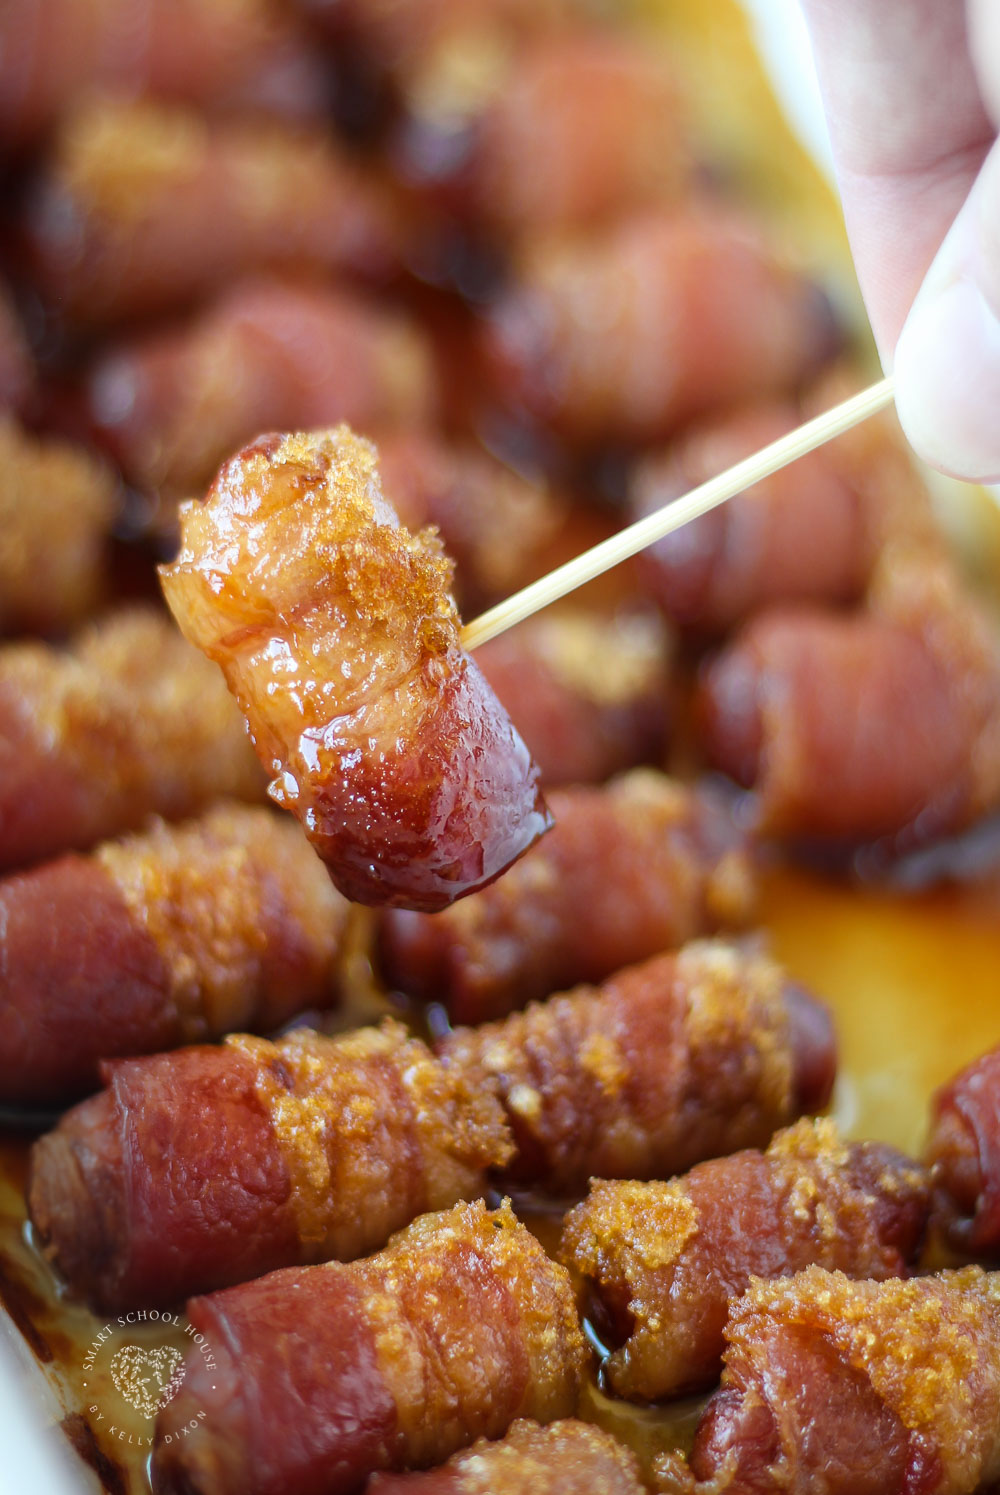 Little sausages wrapped in bacon and smothered in sweet brown sugar. An easy recipe for parties, game day, or potlucks! They are baked to mouthwatering golden brown perfection. These Little Smokies Wrapped in Bacon are so addictive, everyone loves them from kids to adults. What’s not to love here?